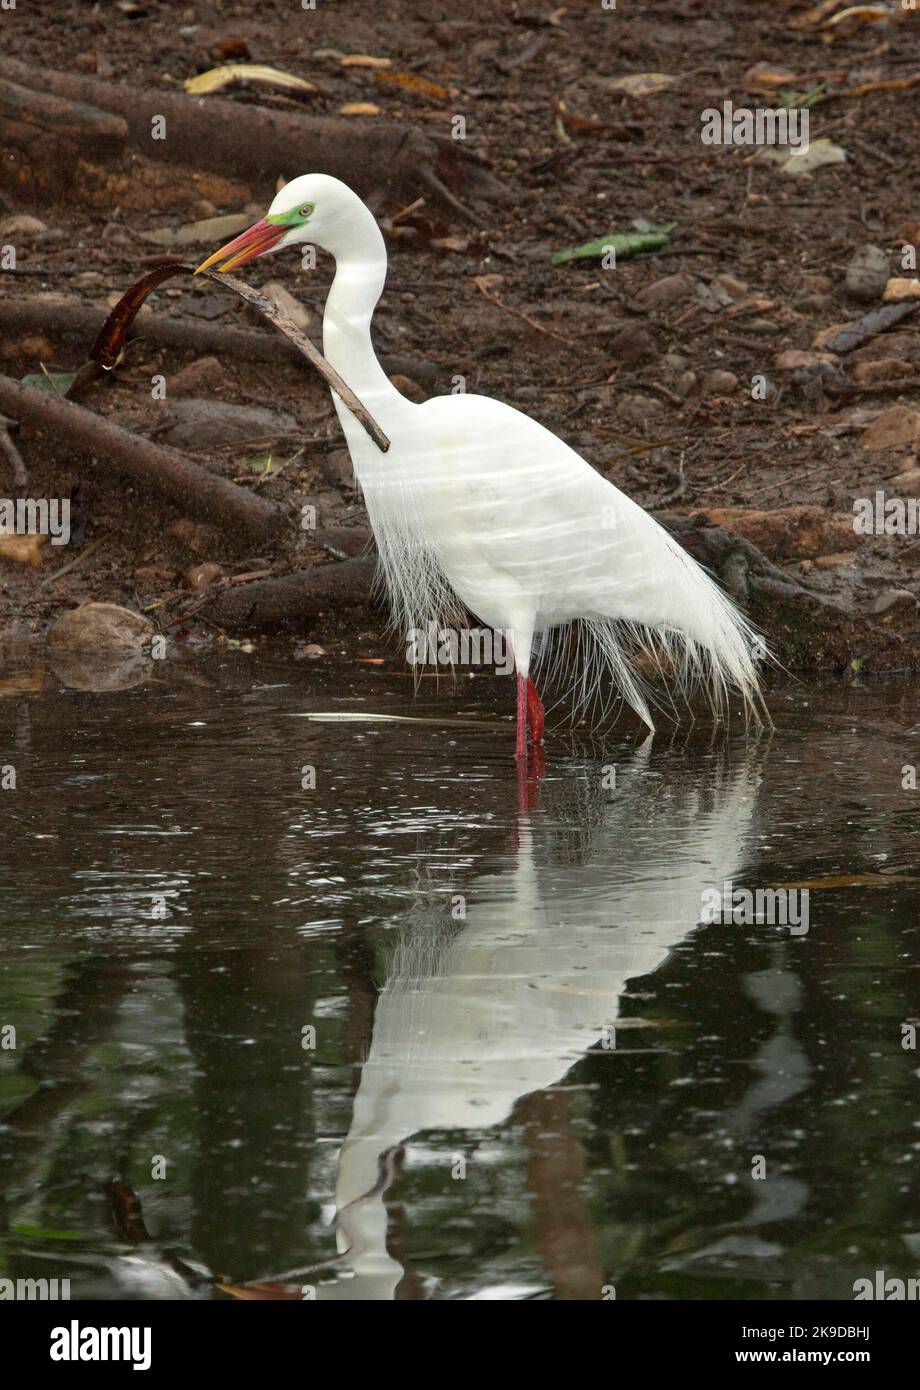 Plumed / Intermediate egret, Ardea intermedia, with breeding plumage, standing in water with stick / nesting material, in its bill, in Australia Stock Photo